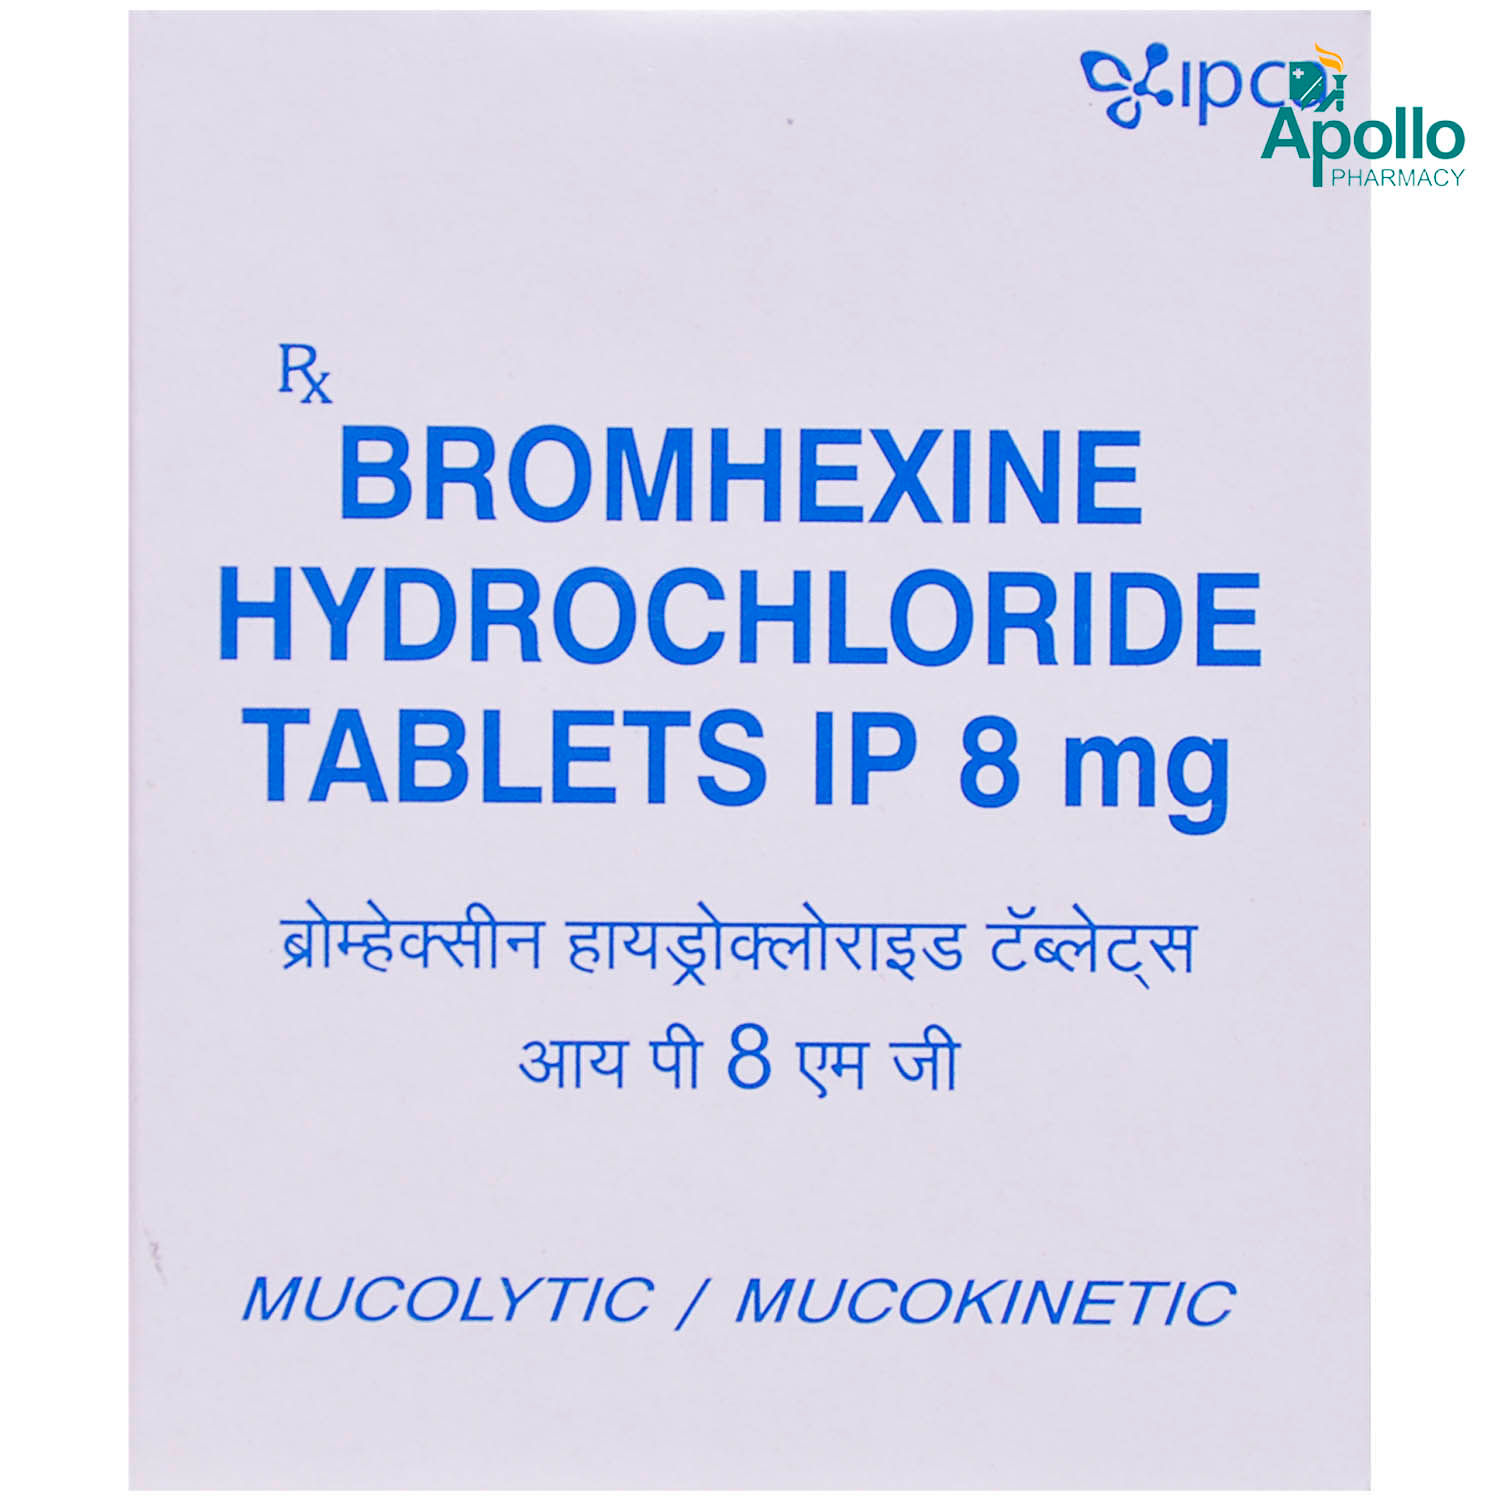 Bromhexine Hydrochloride Tablet 8 mg 10's, Pack of 10 TABLETS